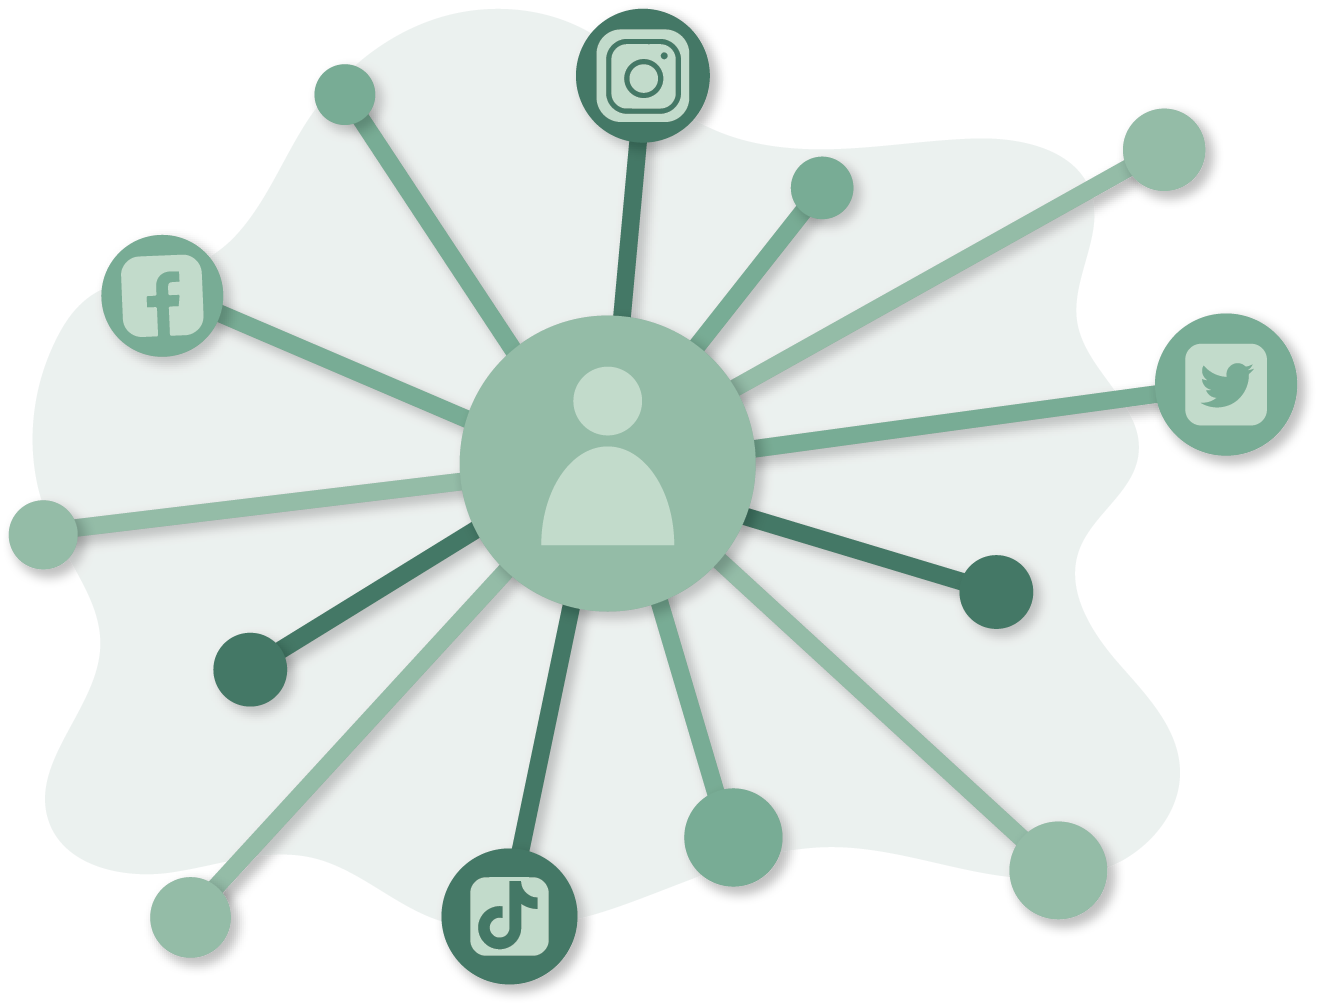 Networking illustration with different social media icons